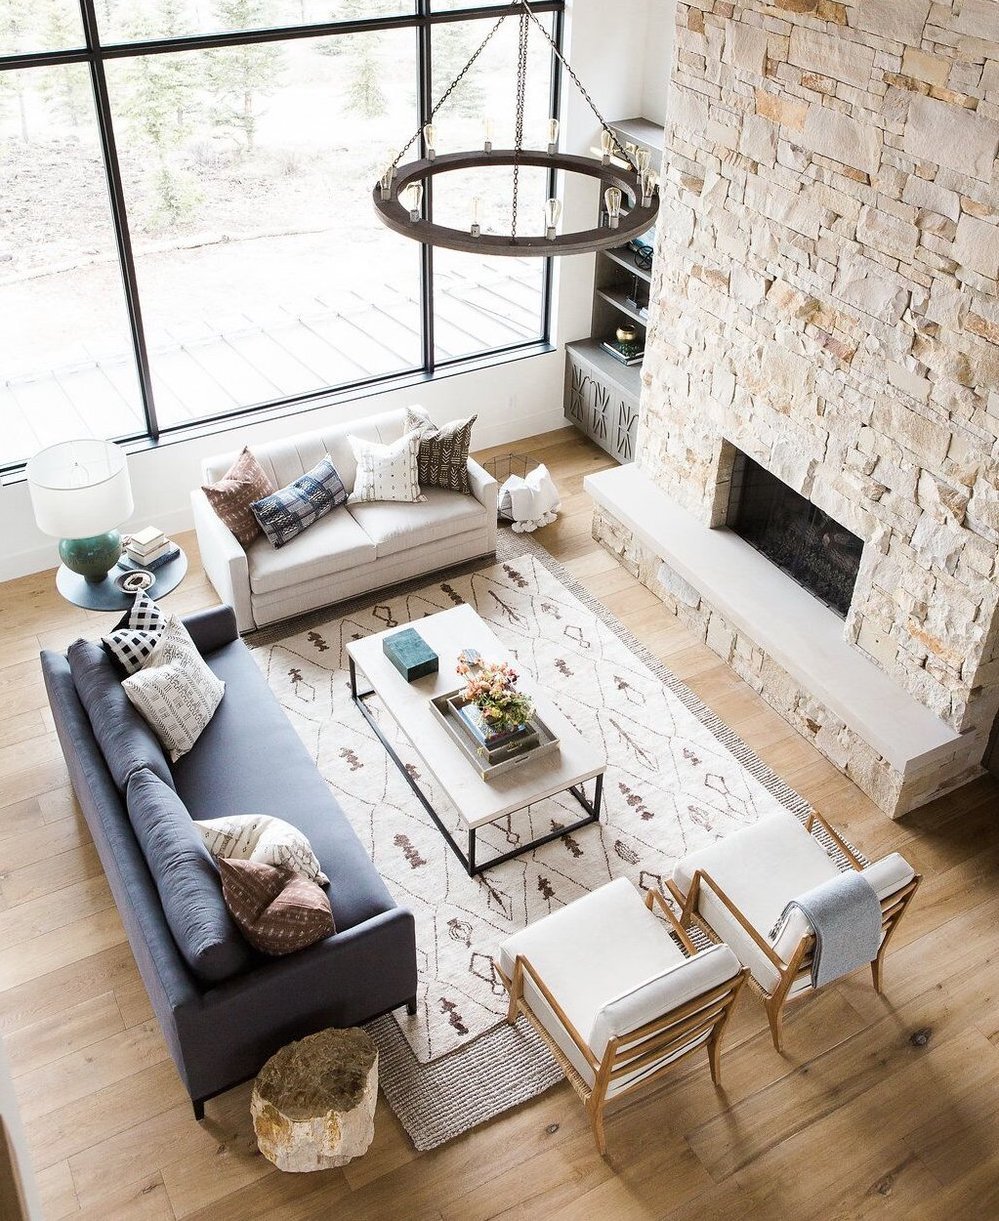 Great+room+with+dramatic+stone+fireplace,+layered+rugs,+and+neutral+color+scheme.jpg